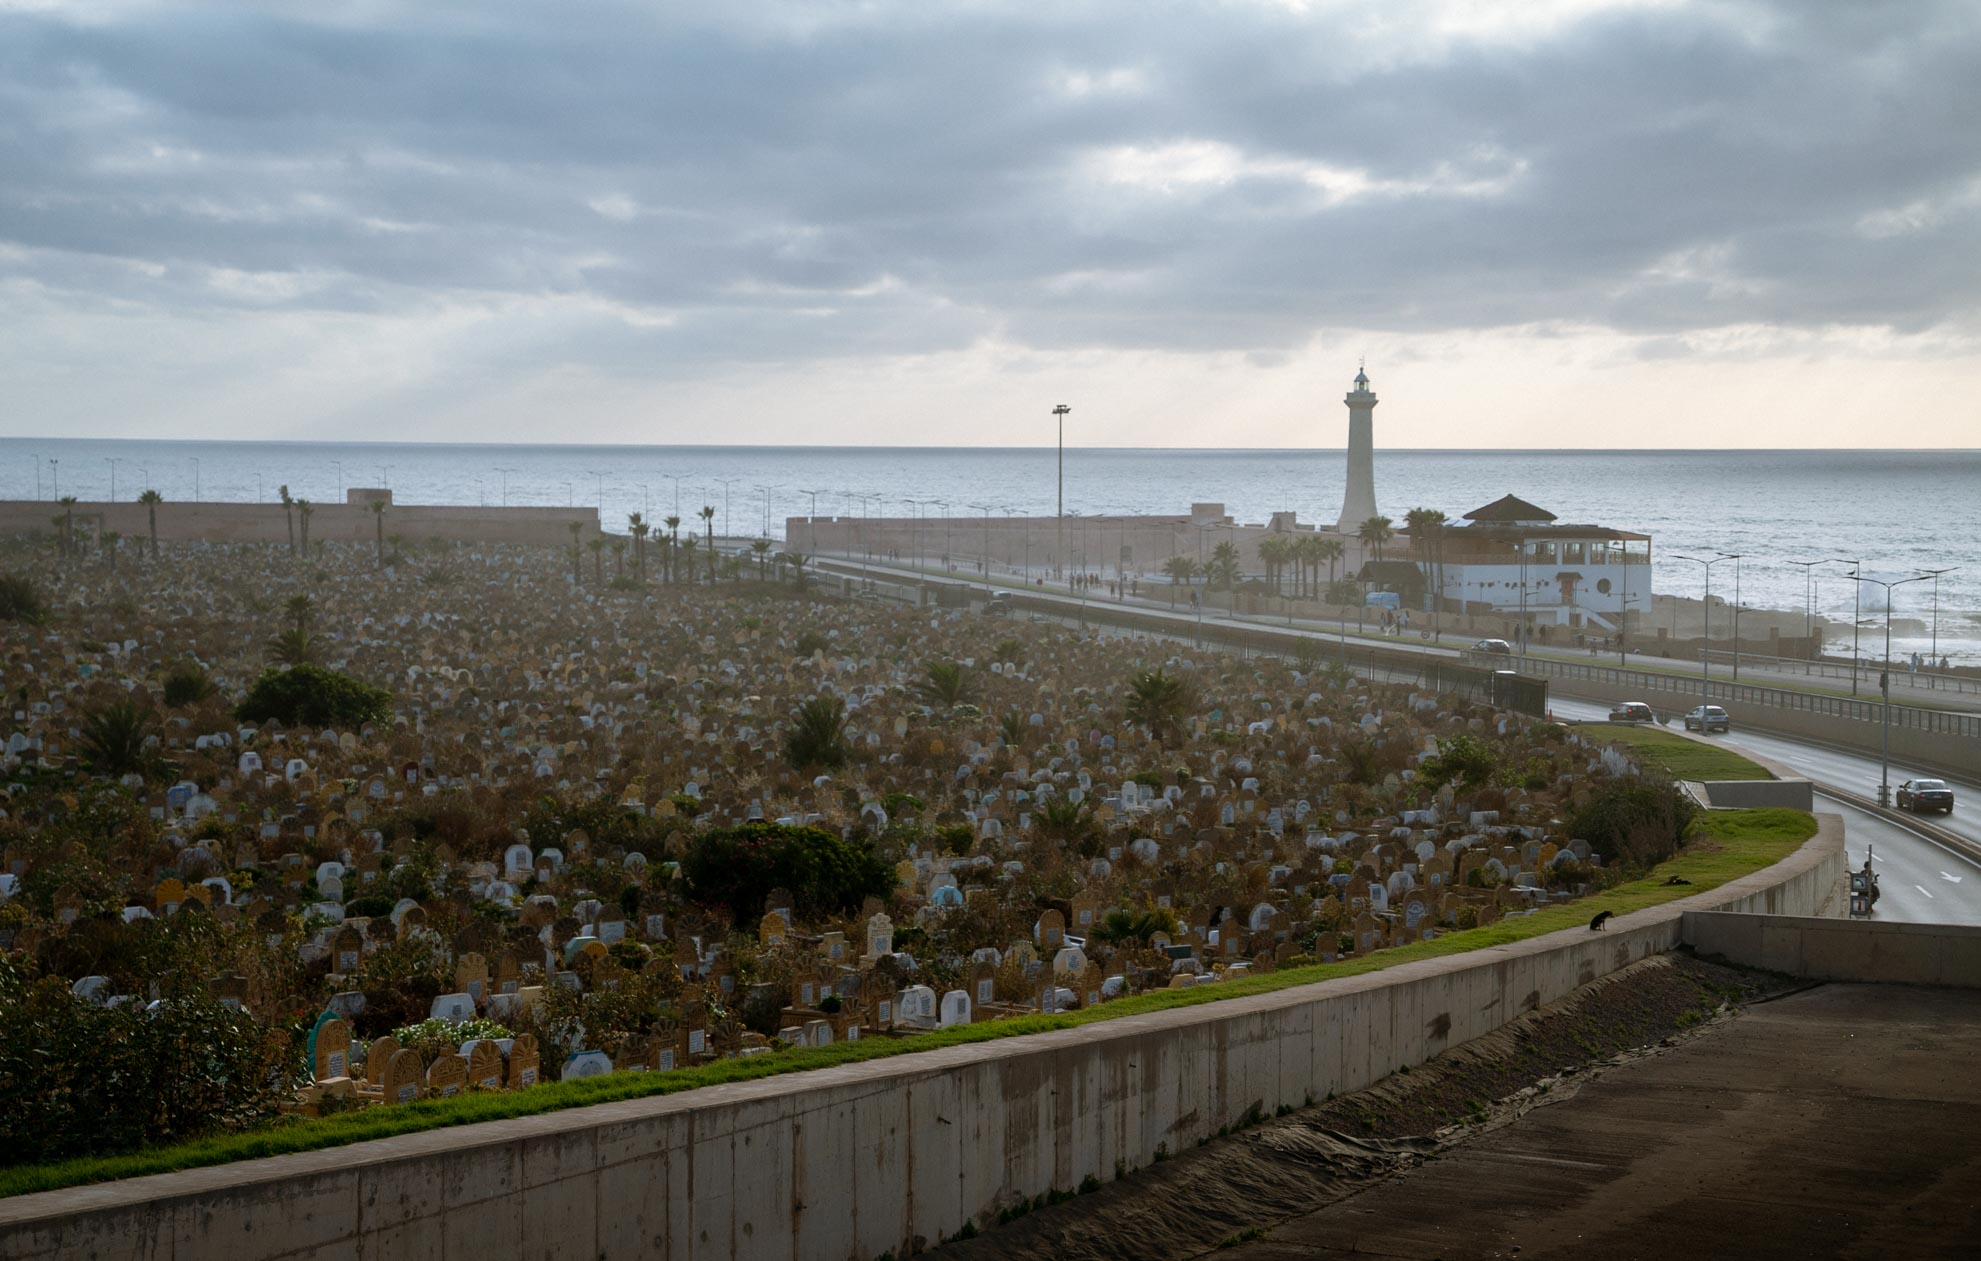 The cemetery by the sea